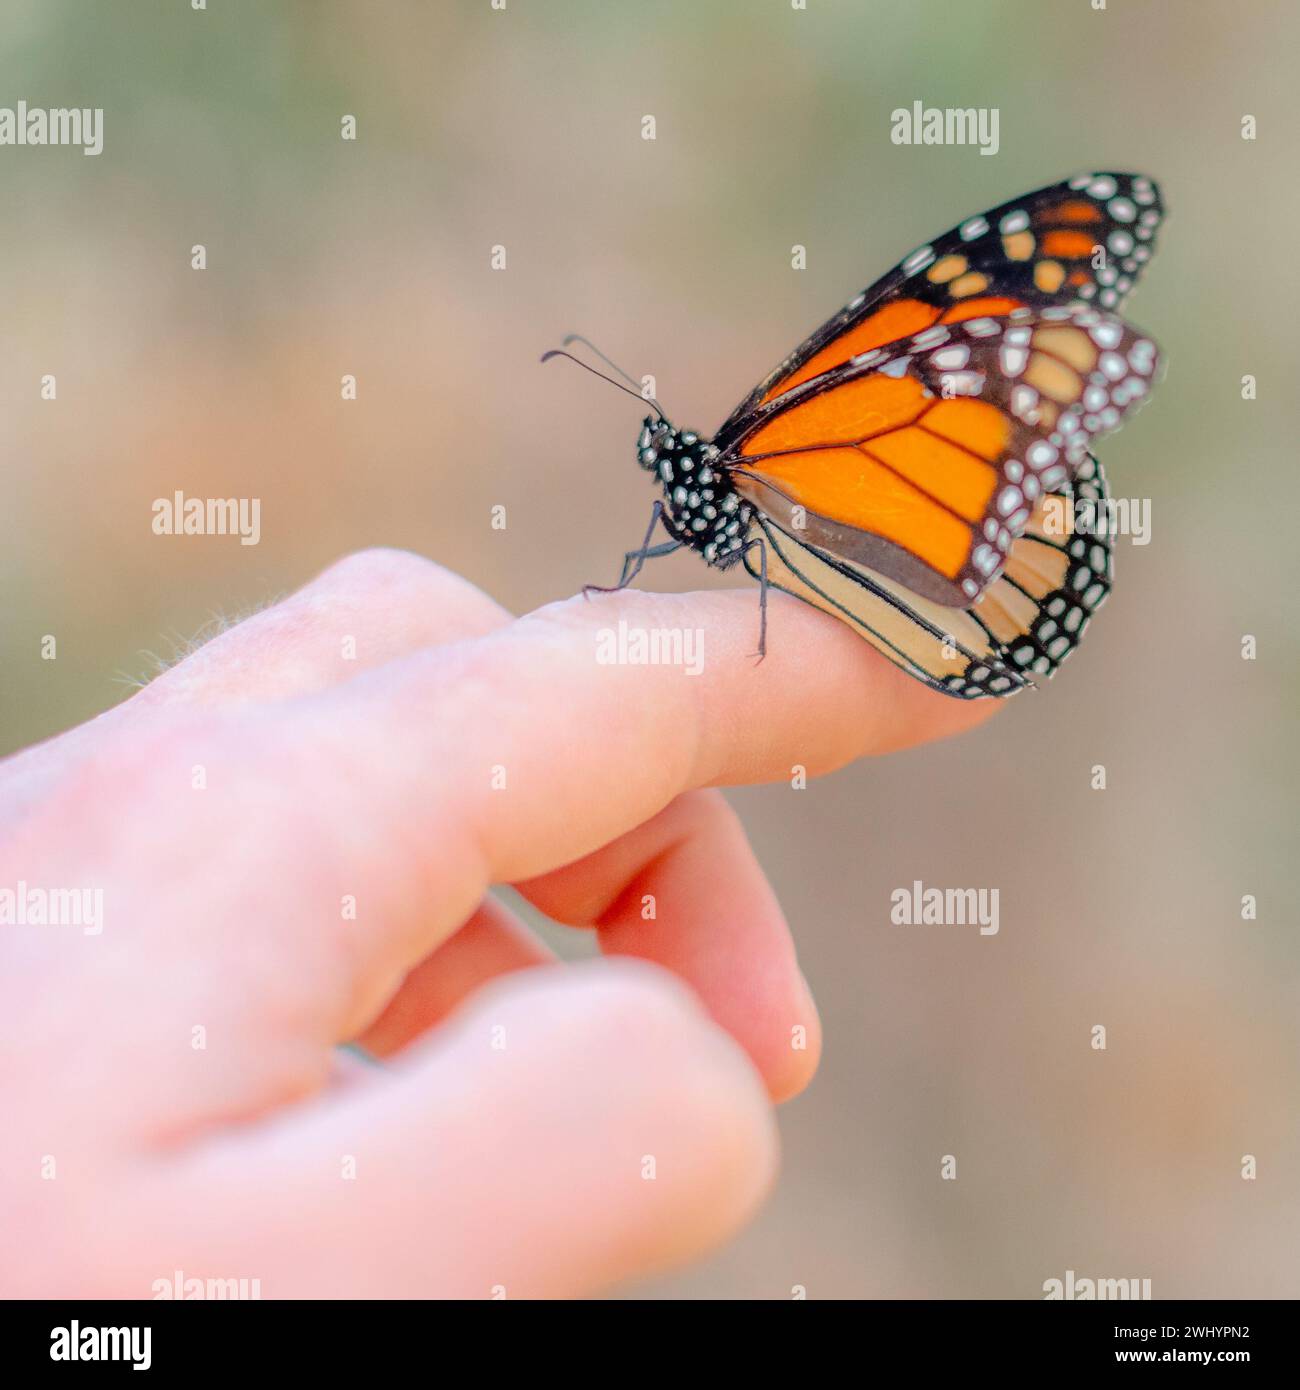 Monarch Butterfly, Resting, Hand, Perched, Human Hand, Close Encounter, Interaction, Nature Connection, Stock Photo